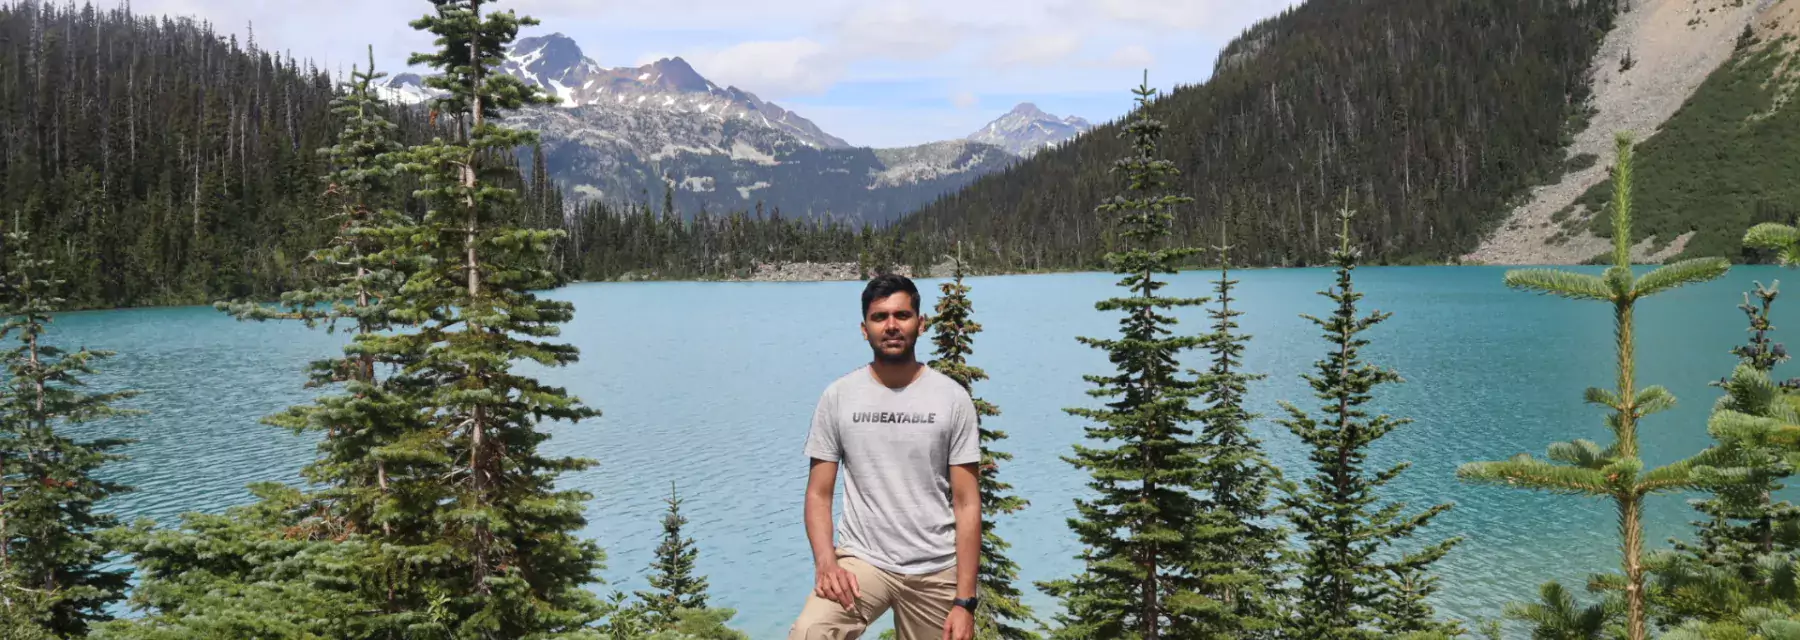 Gautham - Master of Data Science Vancouver